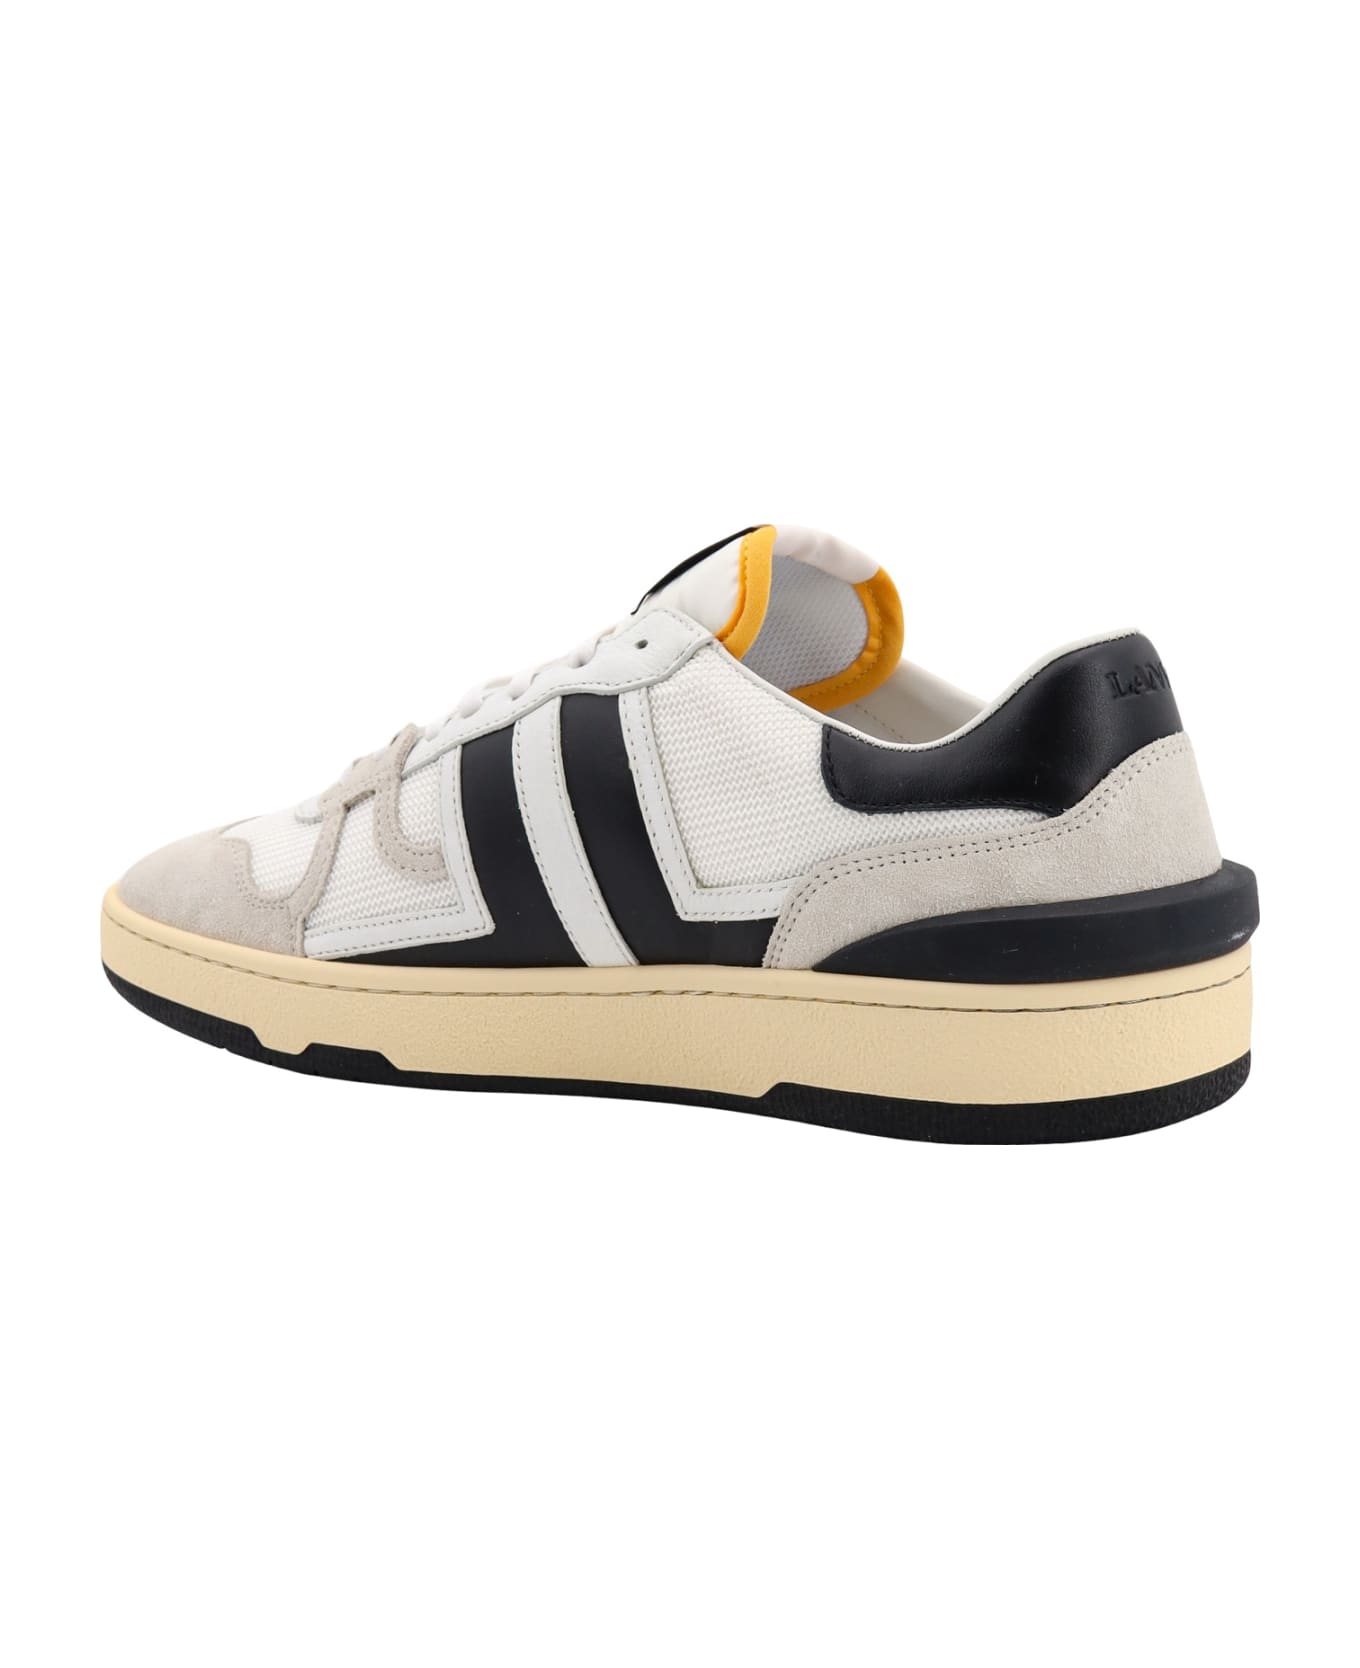 Lanvin Clay Low Sneakers - White